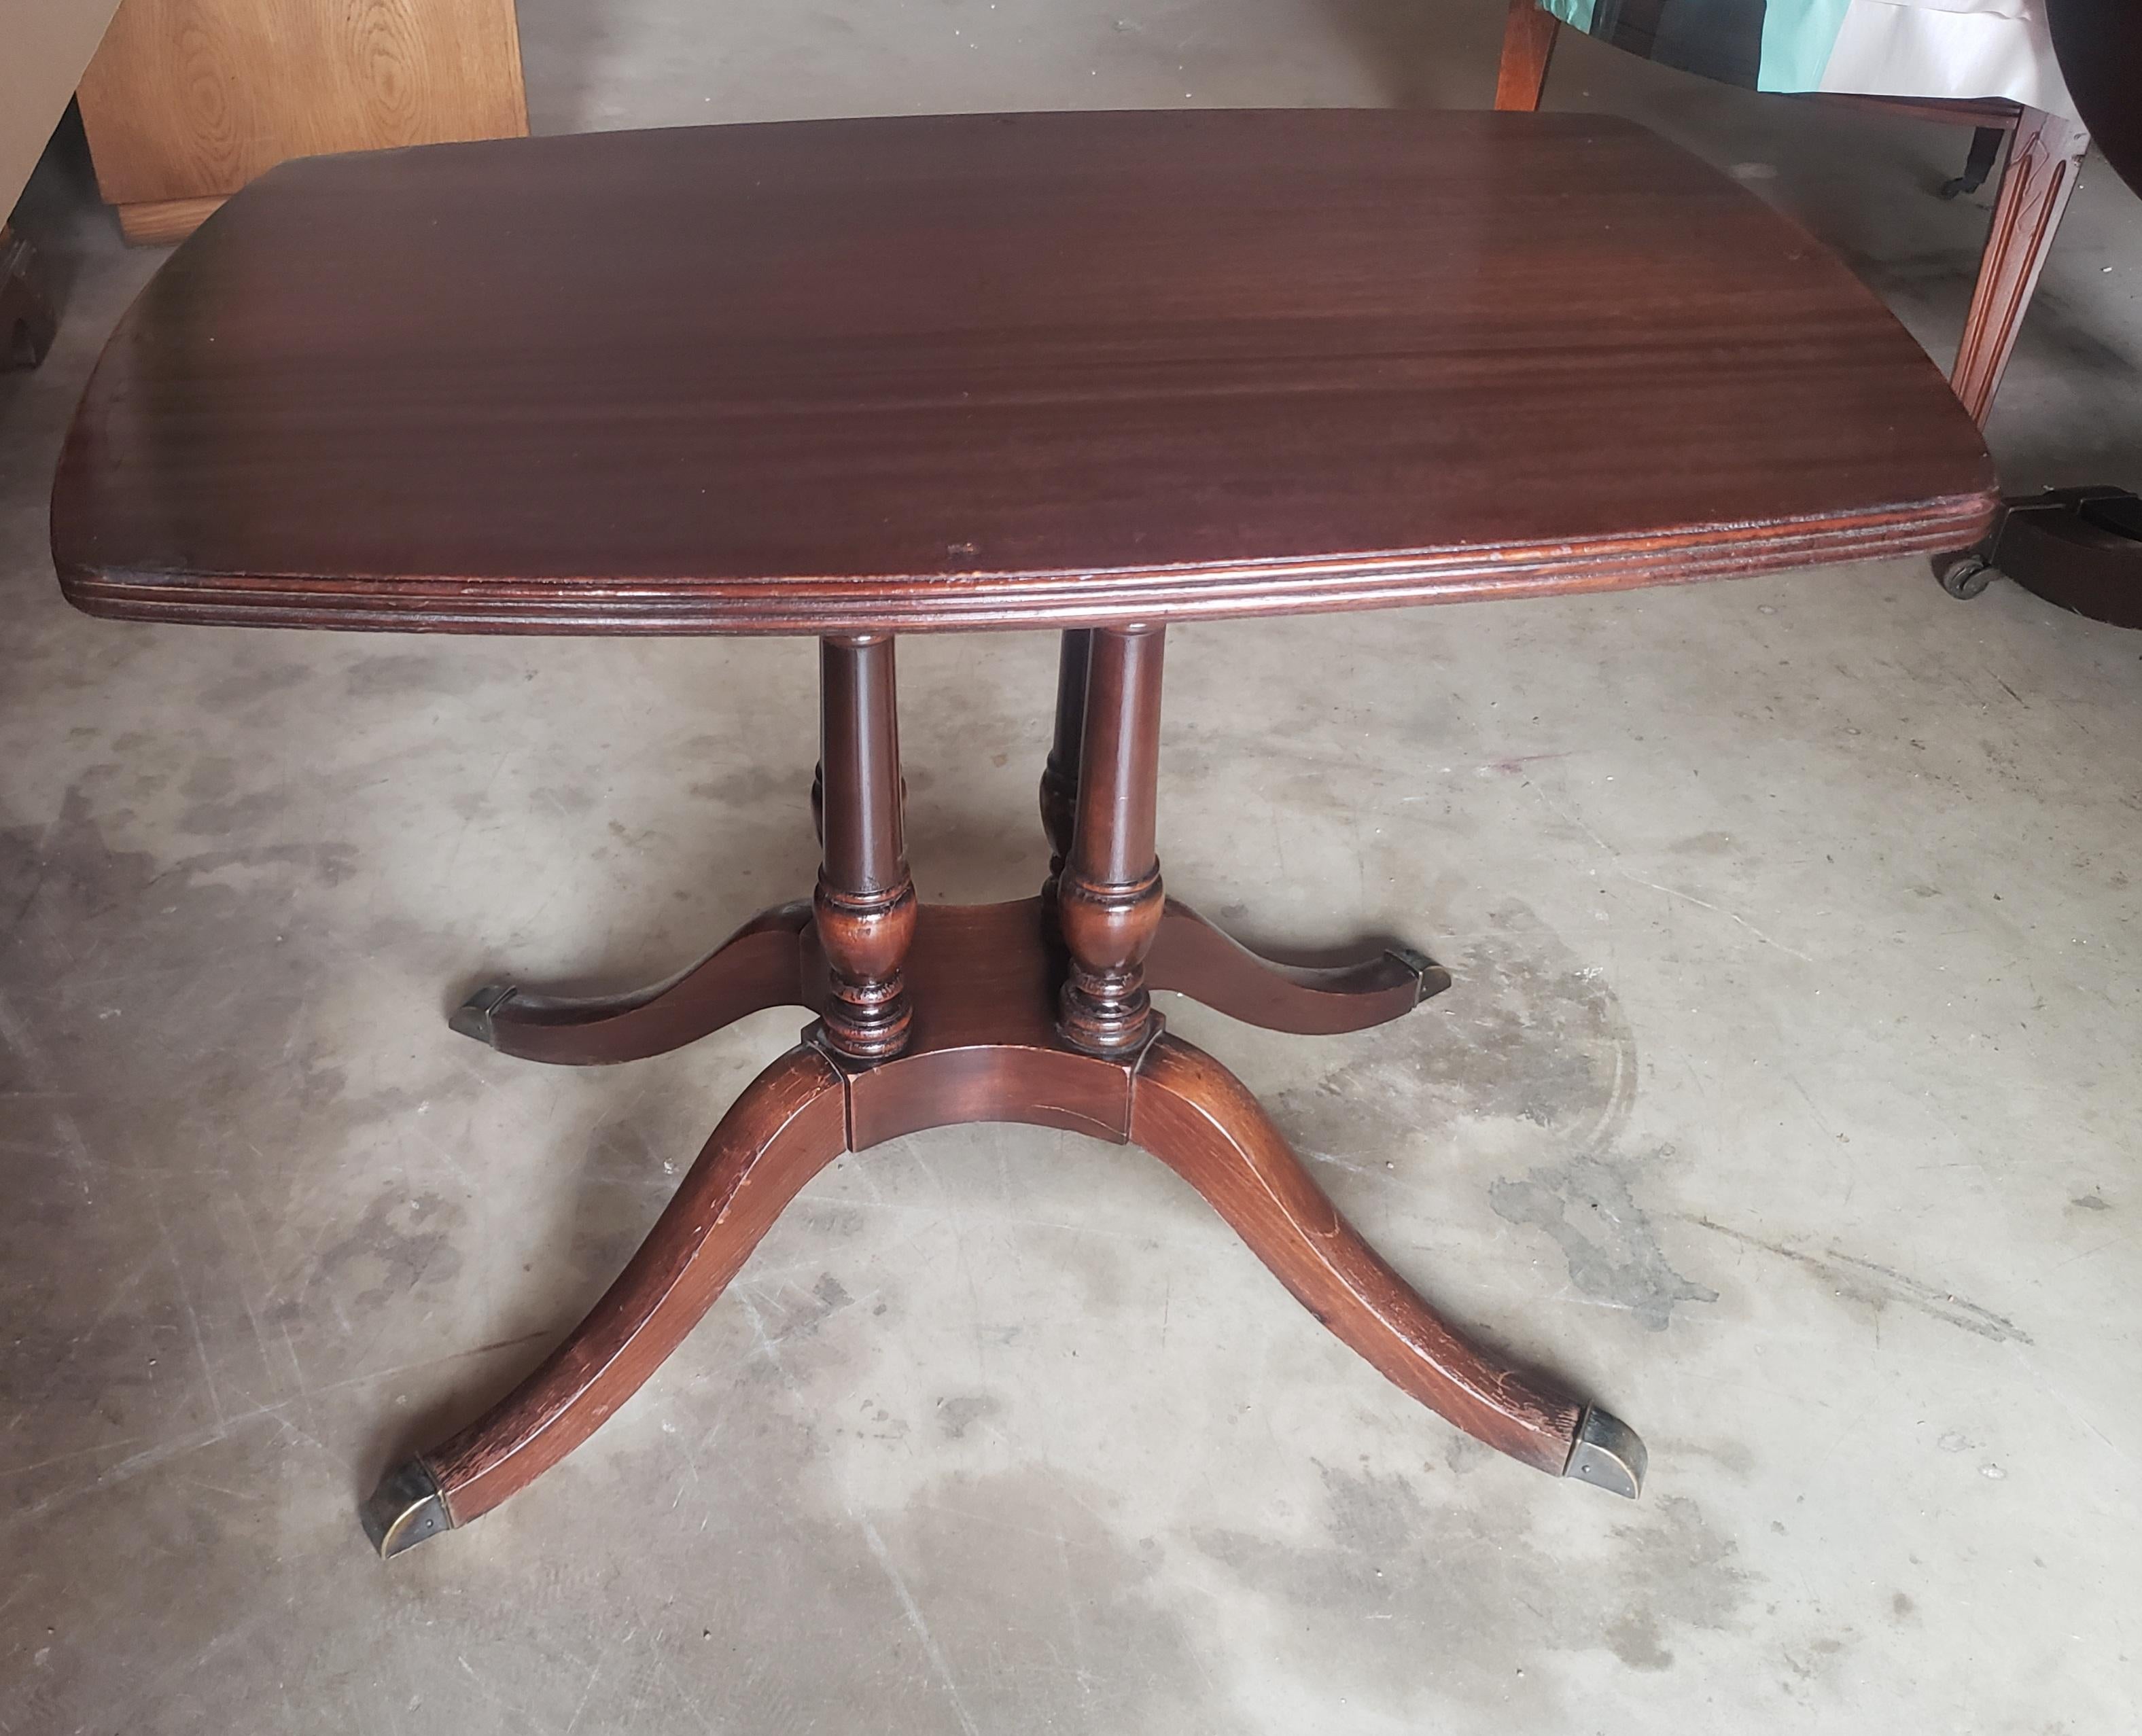 1940s Brandt Furniture Mahogany Side Table with Glass Tray In Good Condition For Sale In Germantown, MD